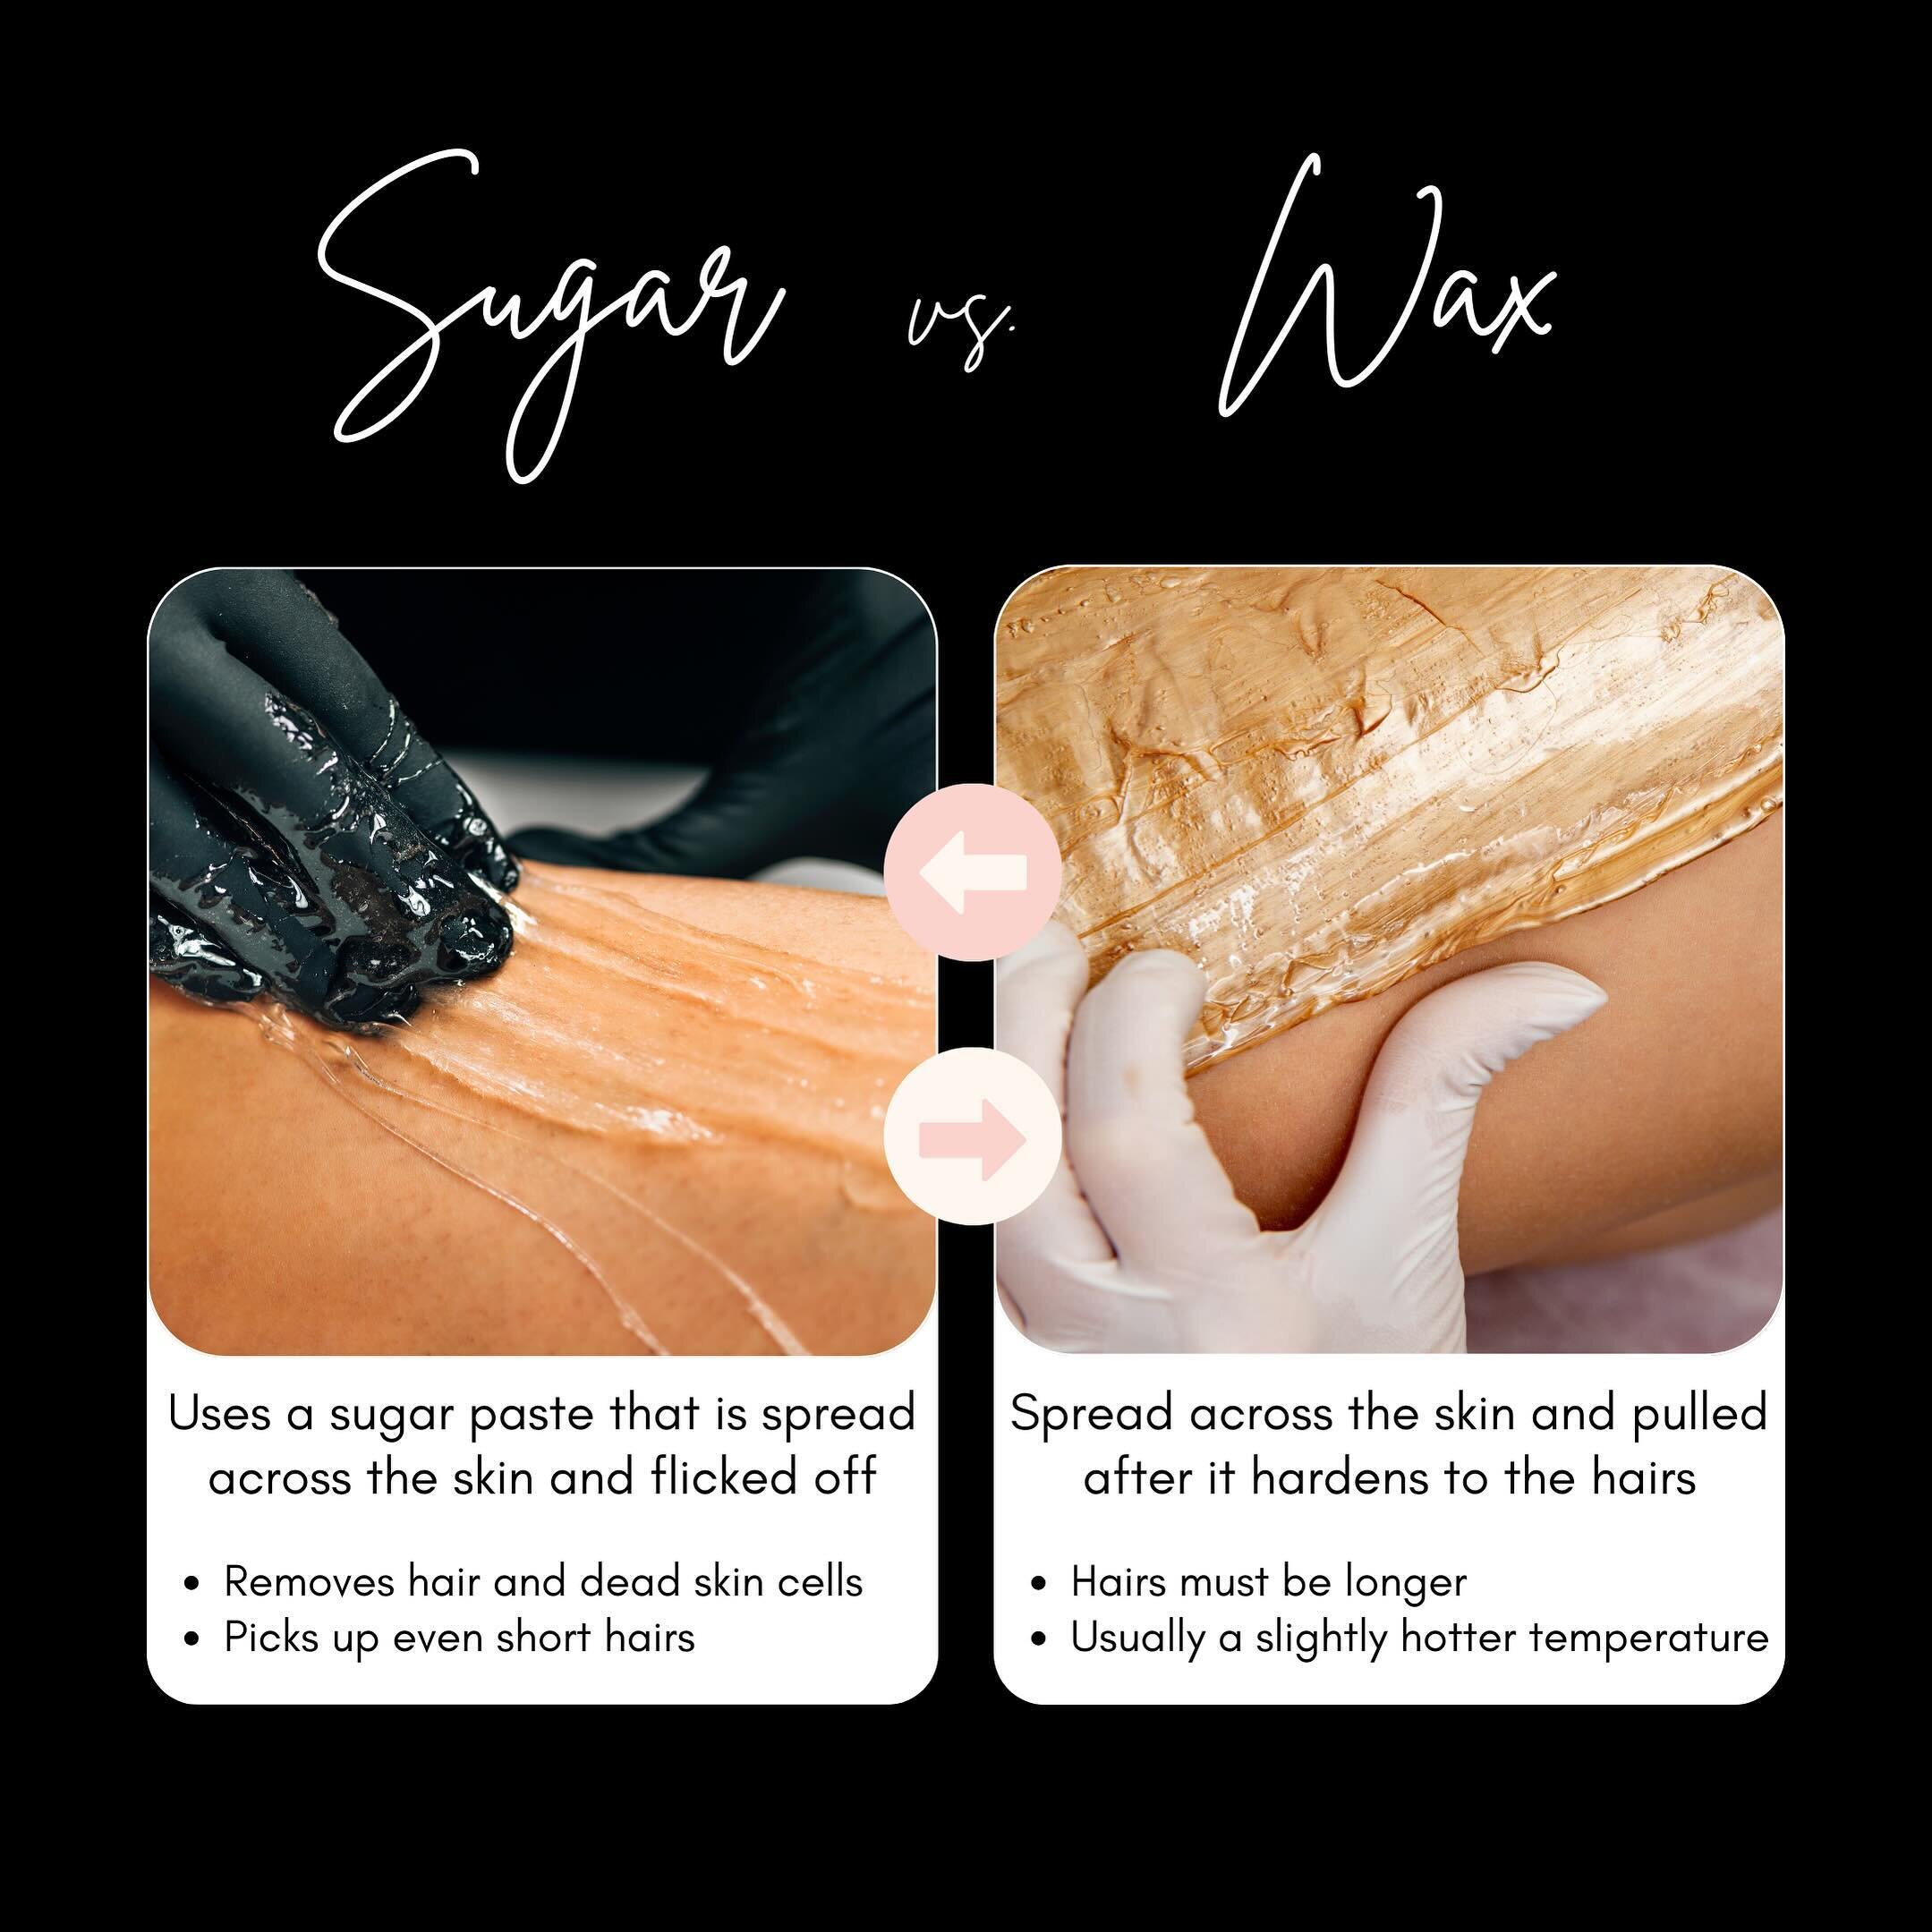 With warmer weather approaching, we are all looking forward to those summer months! 

Start getting ready now and get yourself in a wax routine. By starting monthly waxes now, you will already be able to see a decrease in your hair growth by summerti